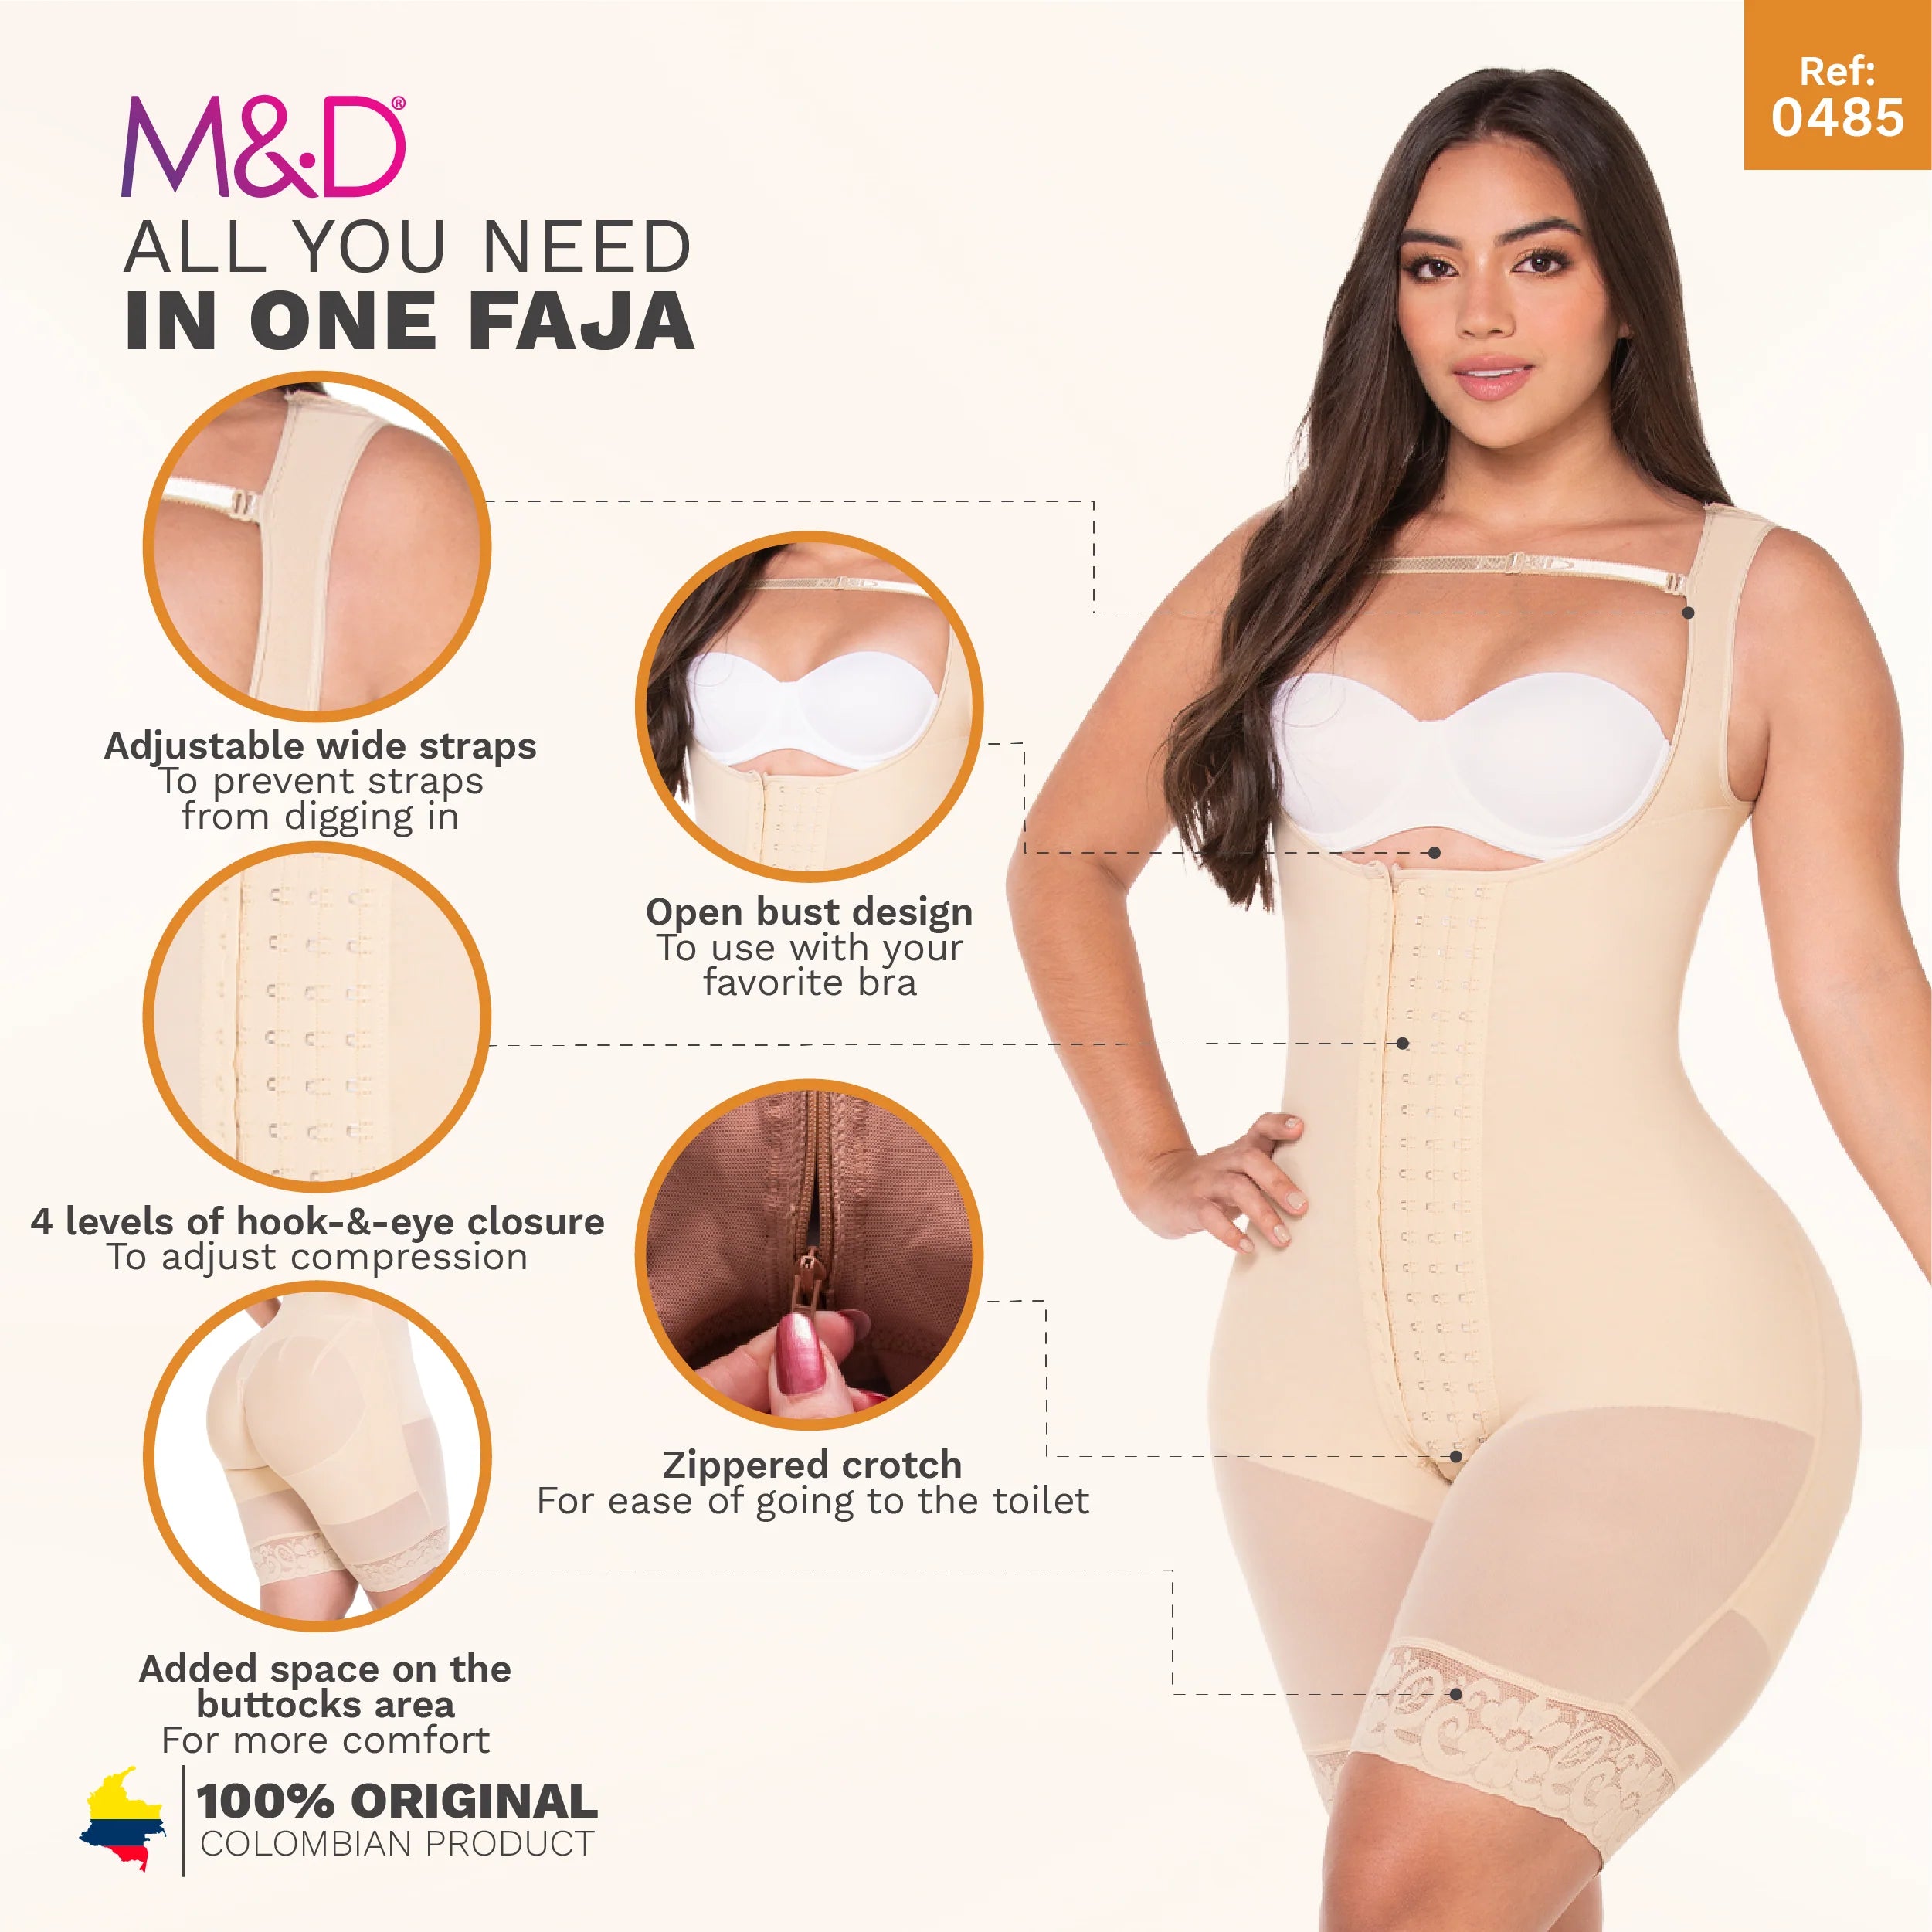 Shapewear & Fajas-Semaless No Zippers No Hooks No Straps Silicone